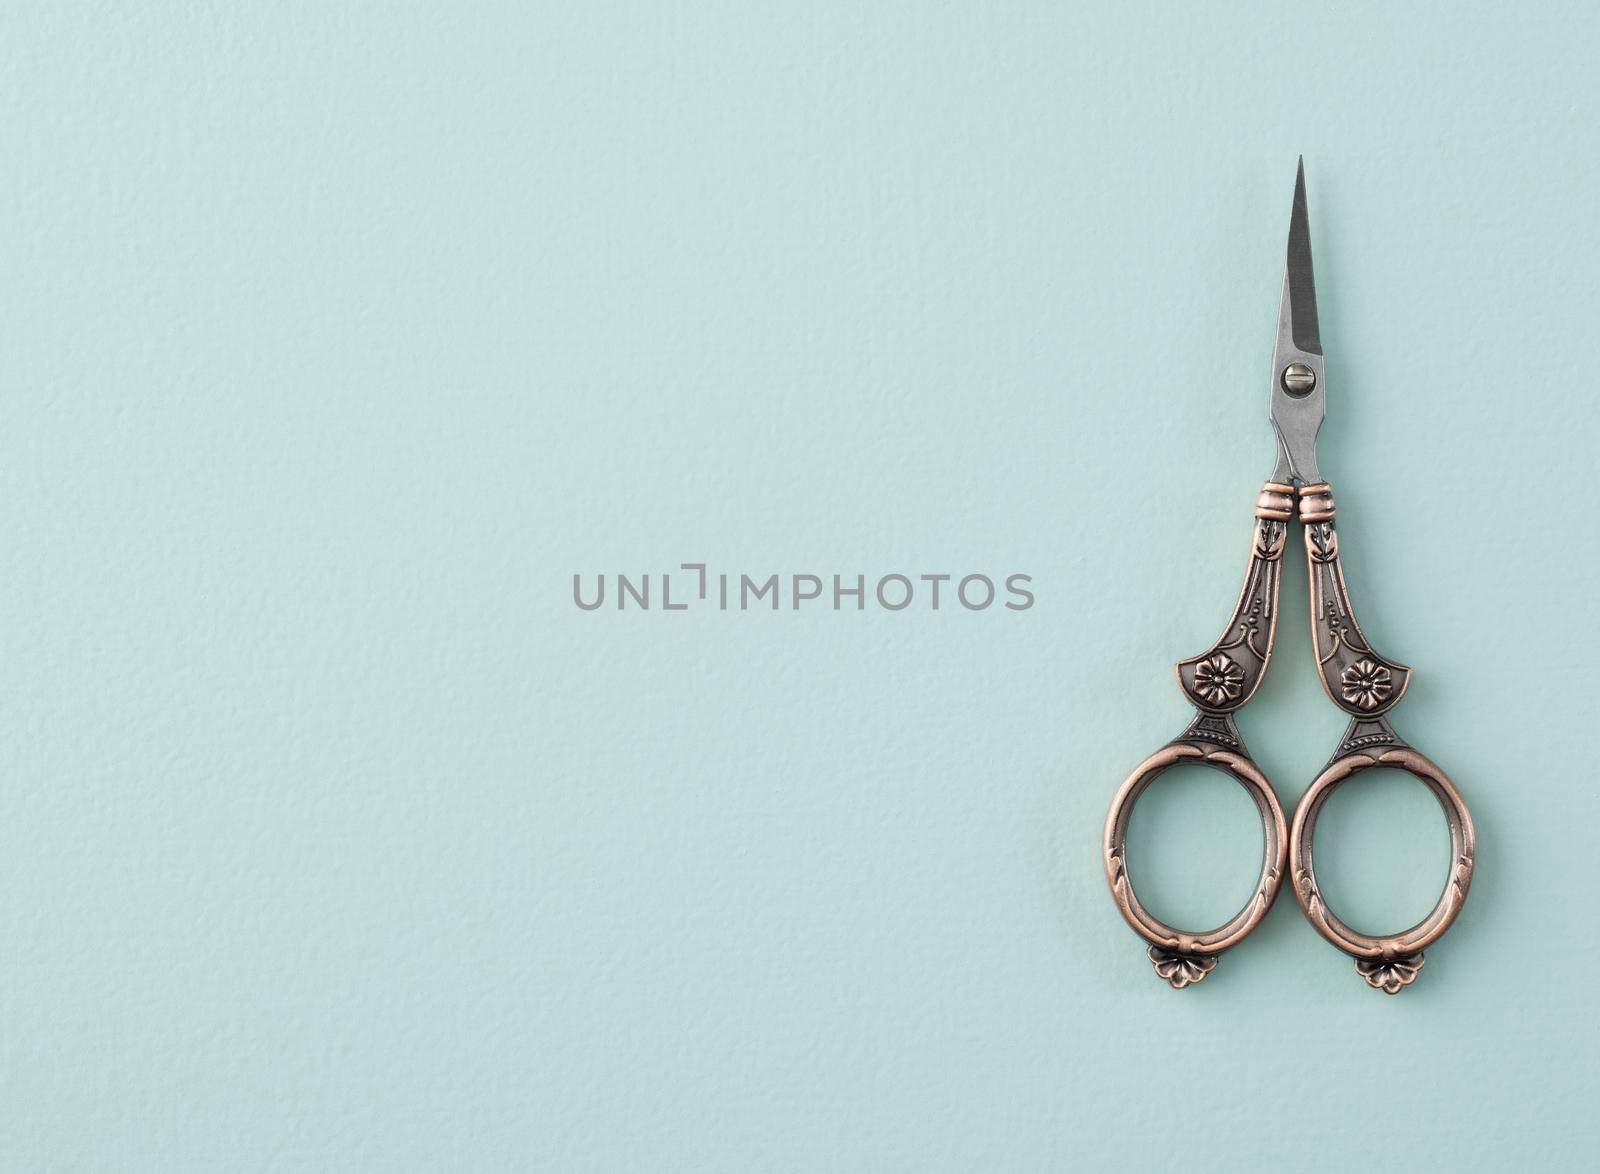 Vintage style embroidery scissors on a solid pastel green background with copy space.